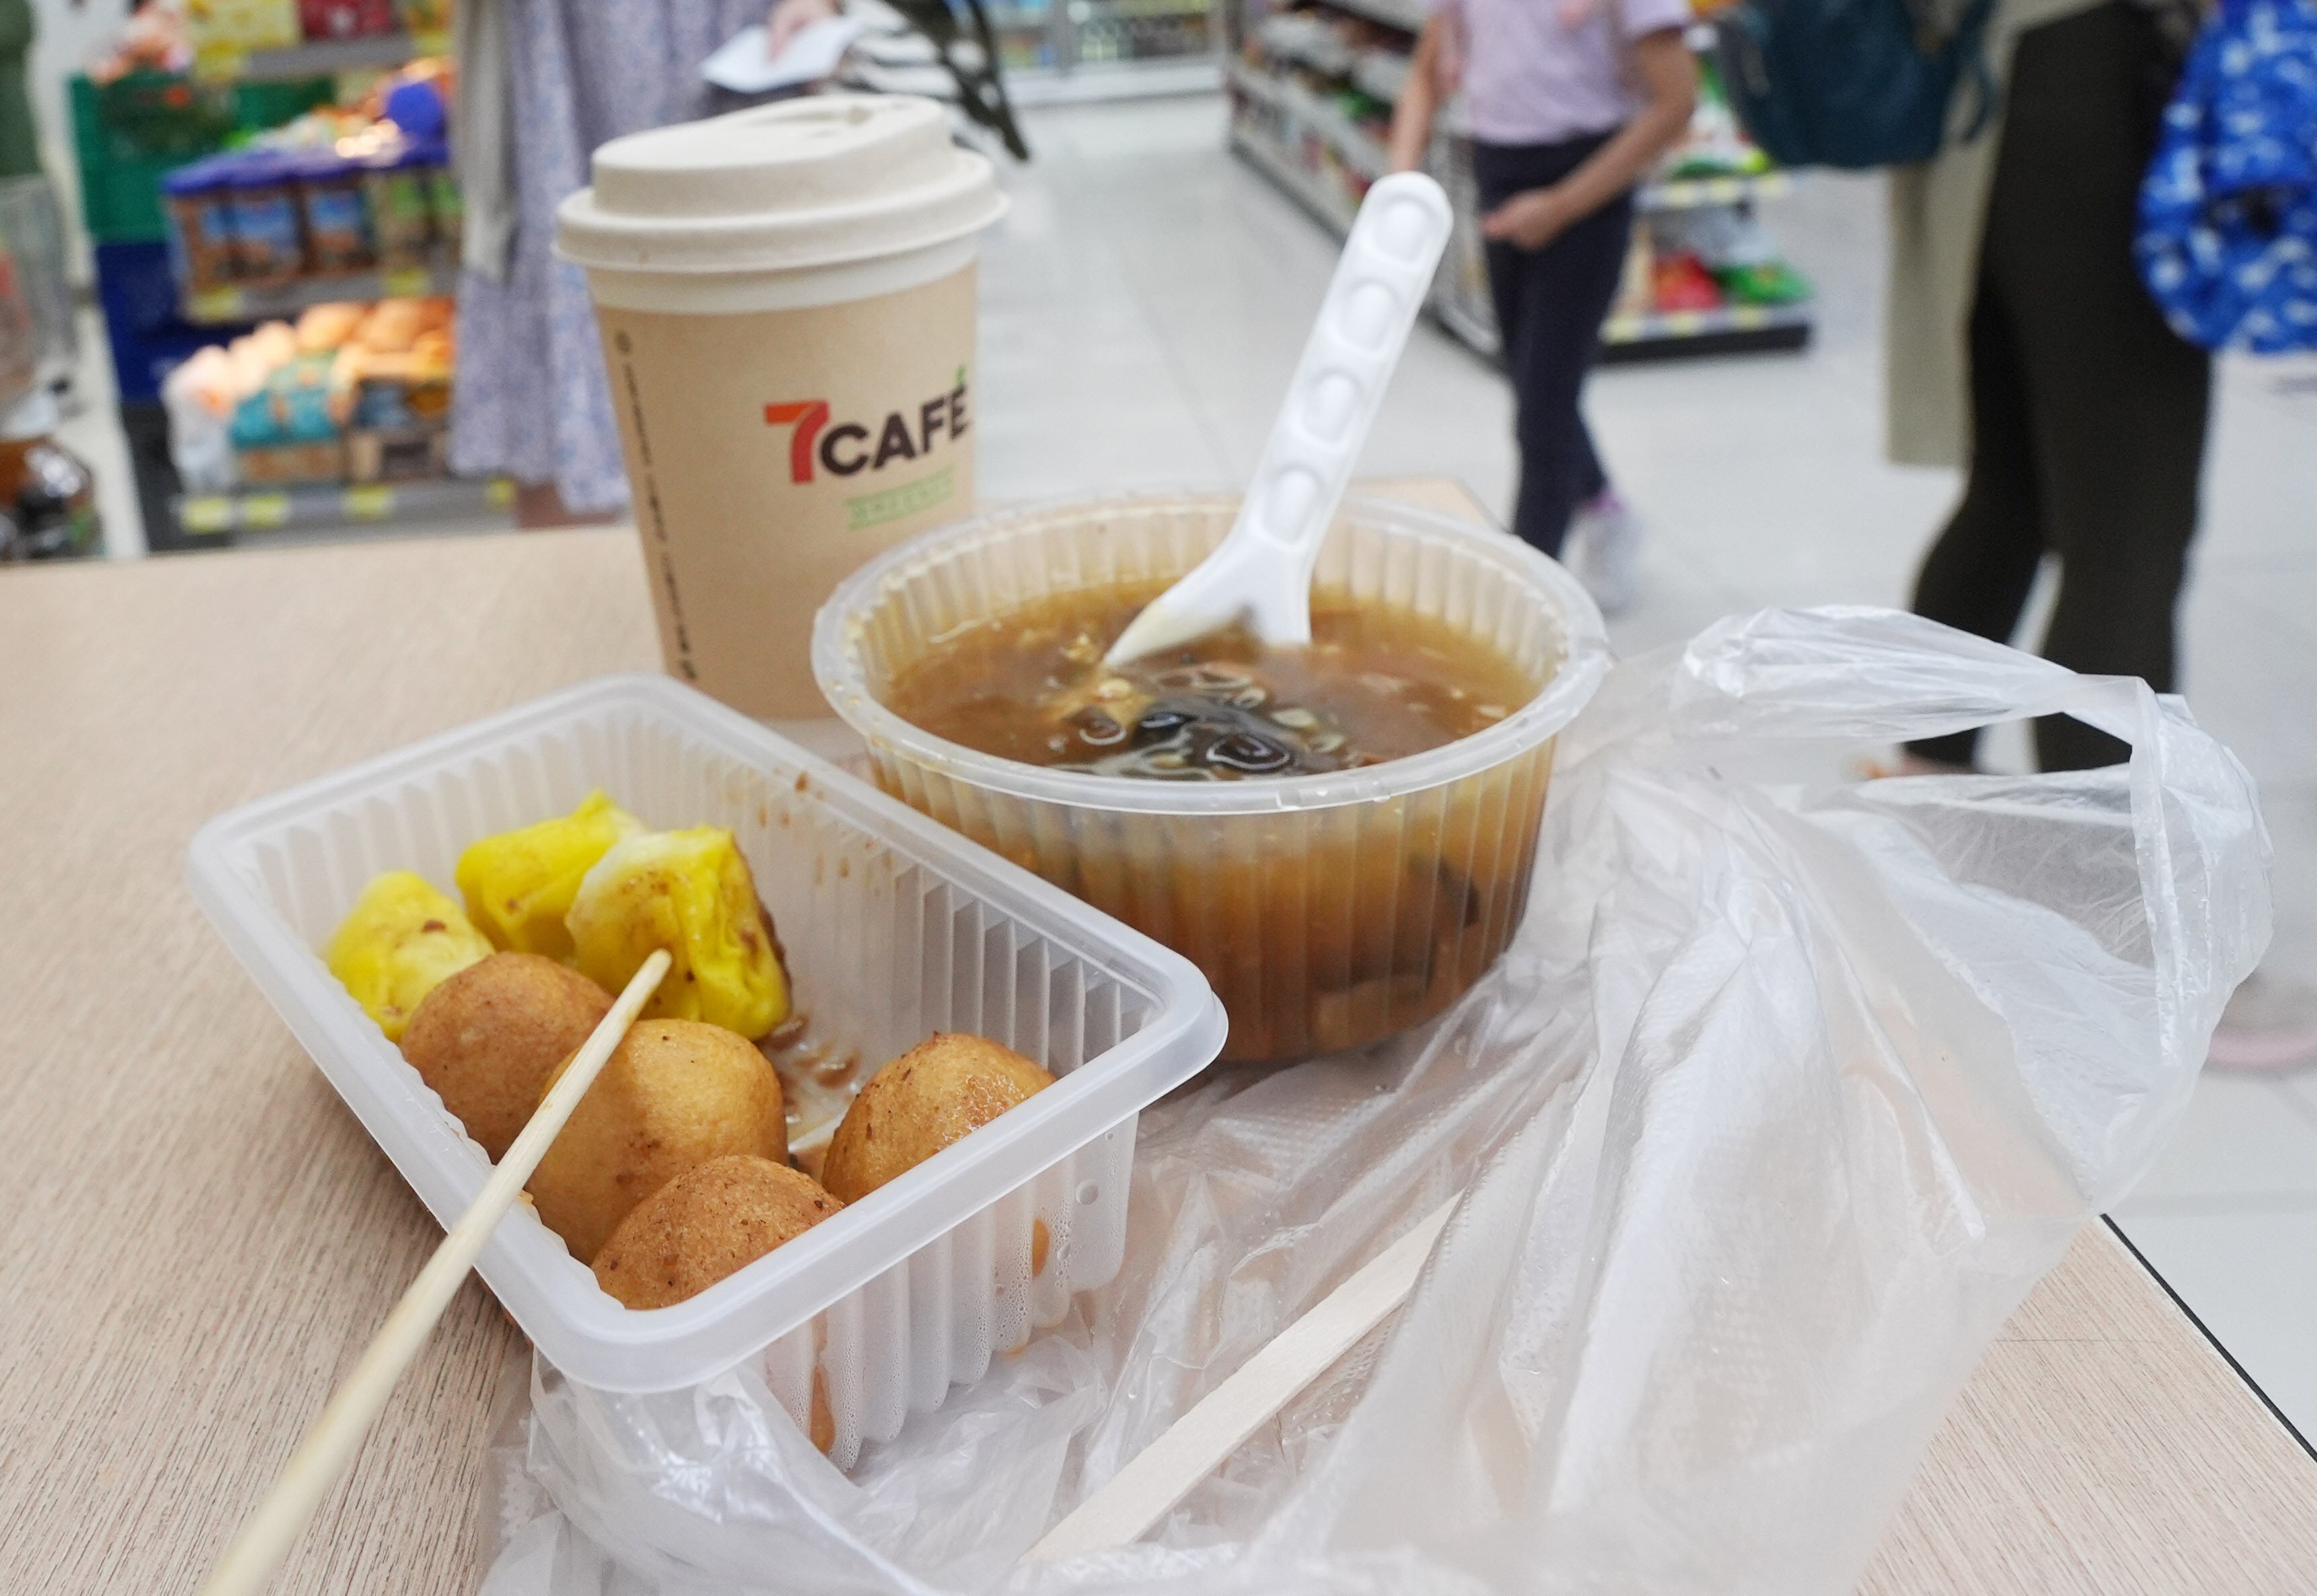 A Post reporter received conflicting answers from three different 7-Eleven outlets on whether he could dine-in after ordering siu mai and fish balls. Photo: Eugene Lee